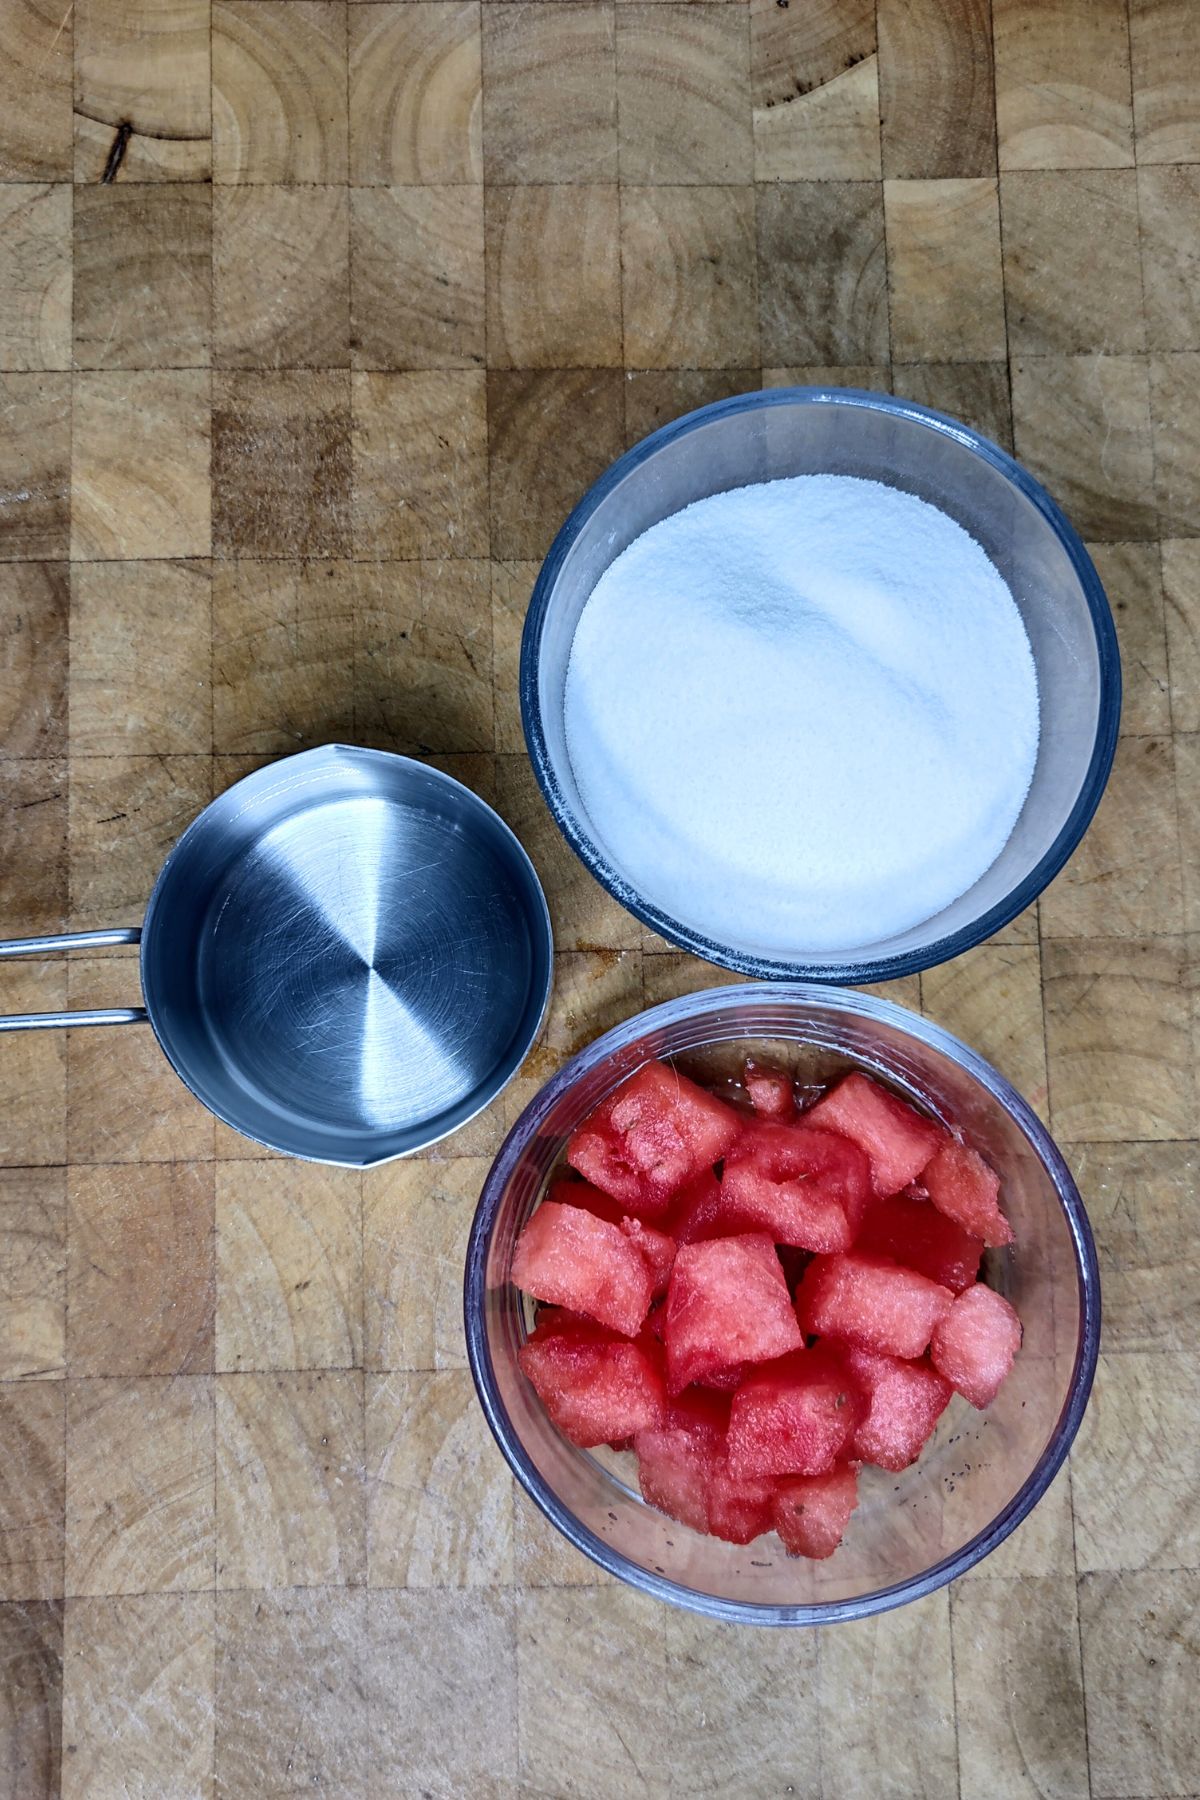 Bowls of sugar, water and diced watermelon on wooden table.